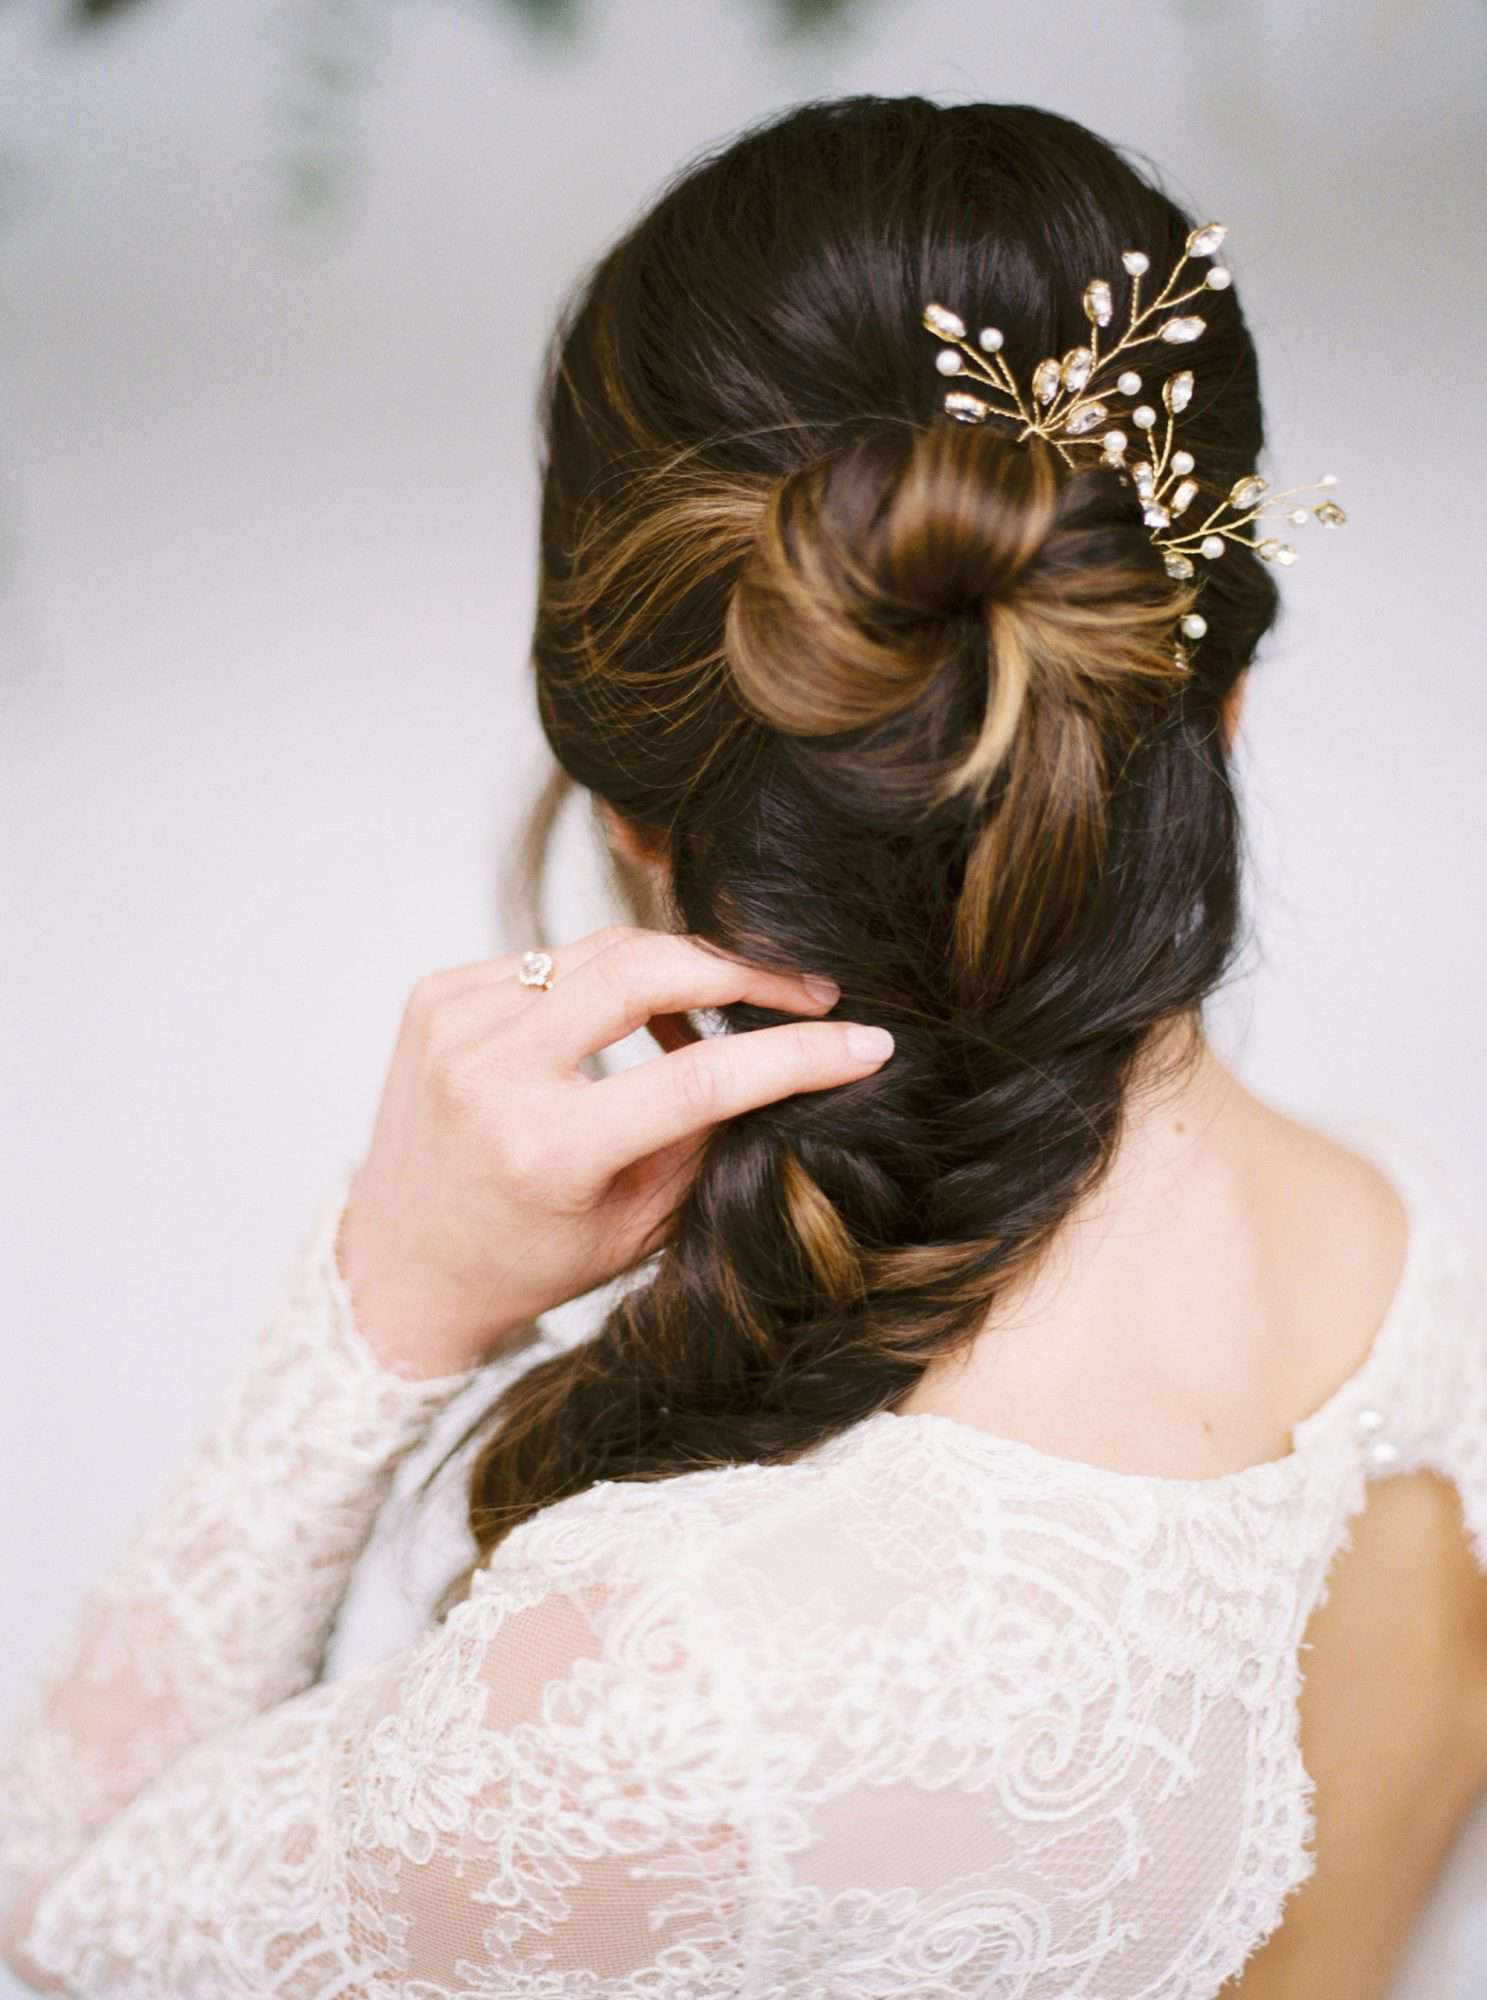 Seven Dos and Don'ts of Wearing a Hair Accessory on Your Wedding Day |  Martha Stewart